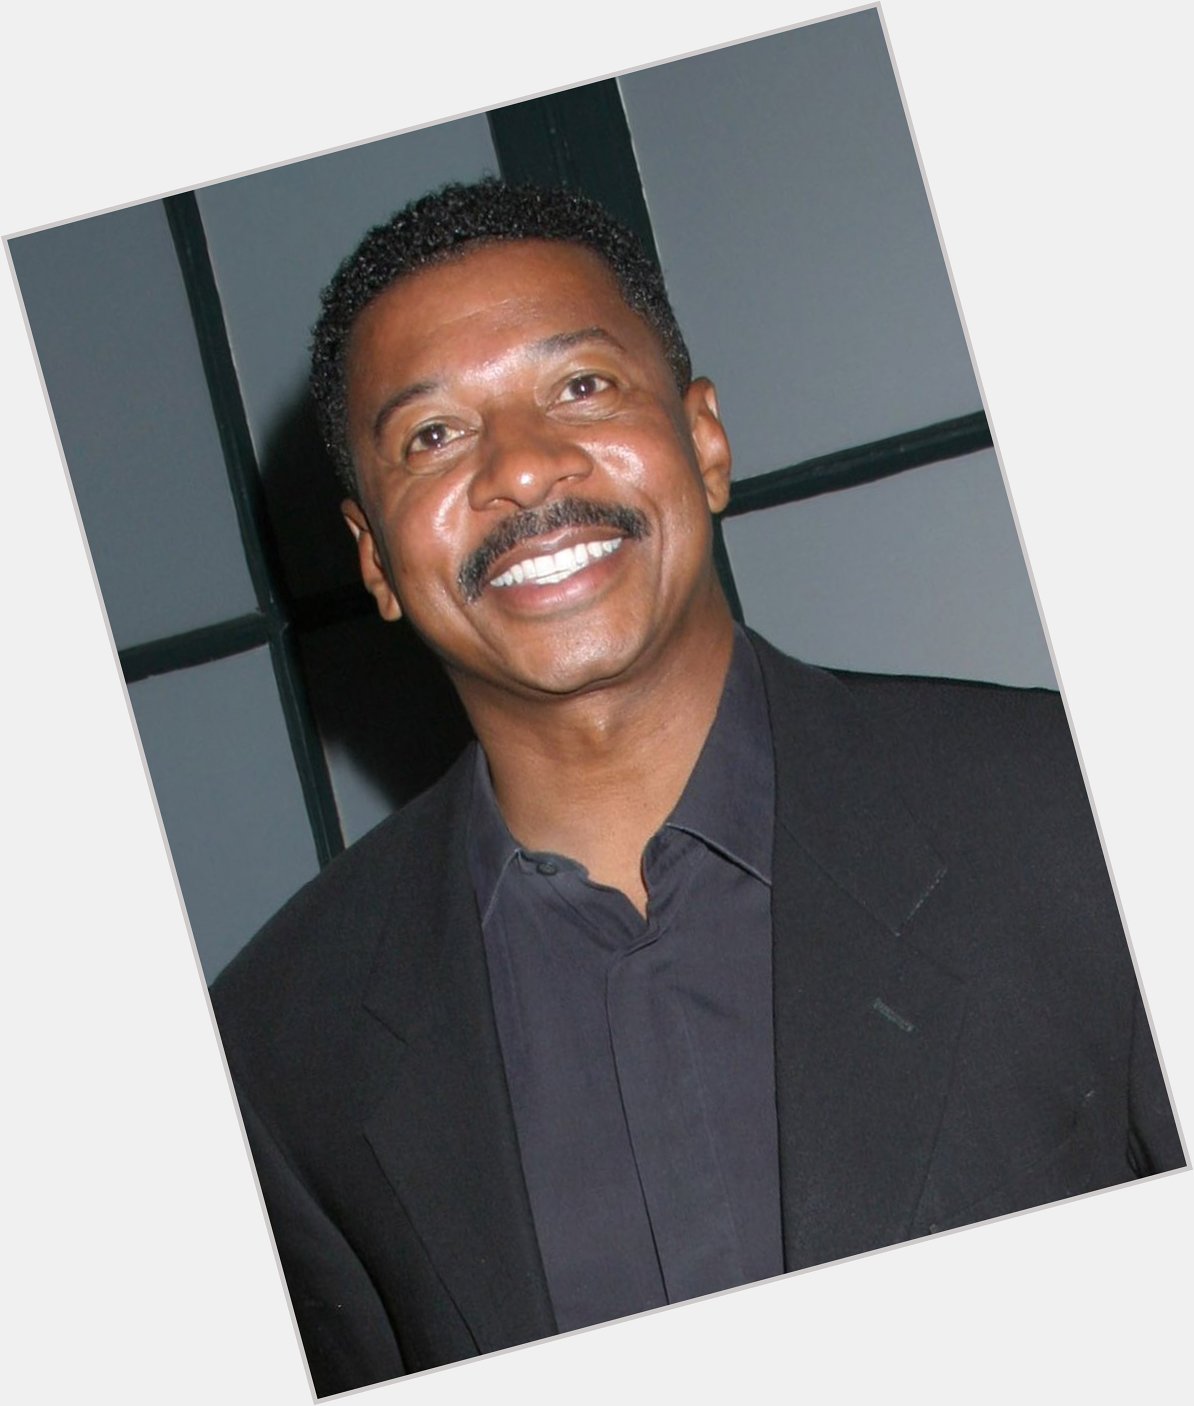 Happy Birthday to actor, comedian, film director and writer Robert Townsend born on February 6, 1957 